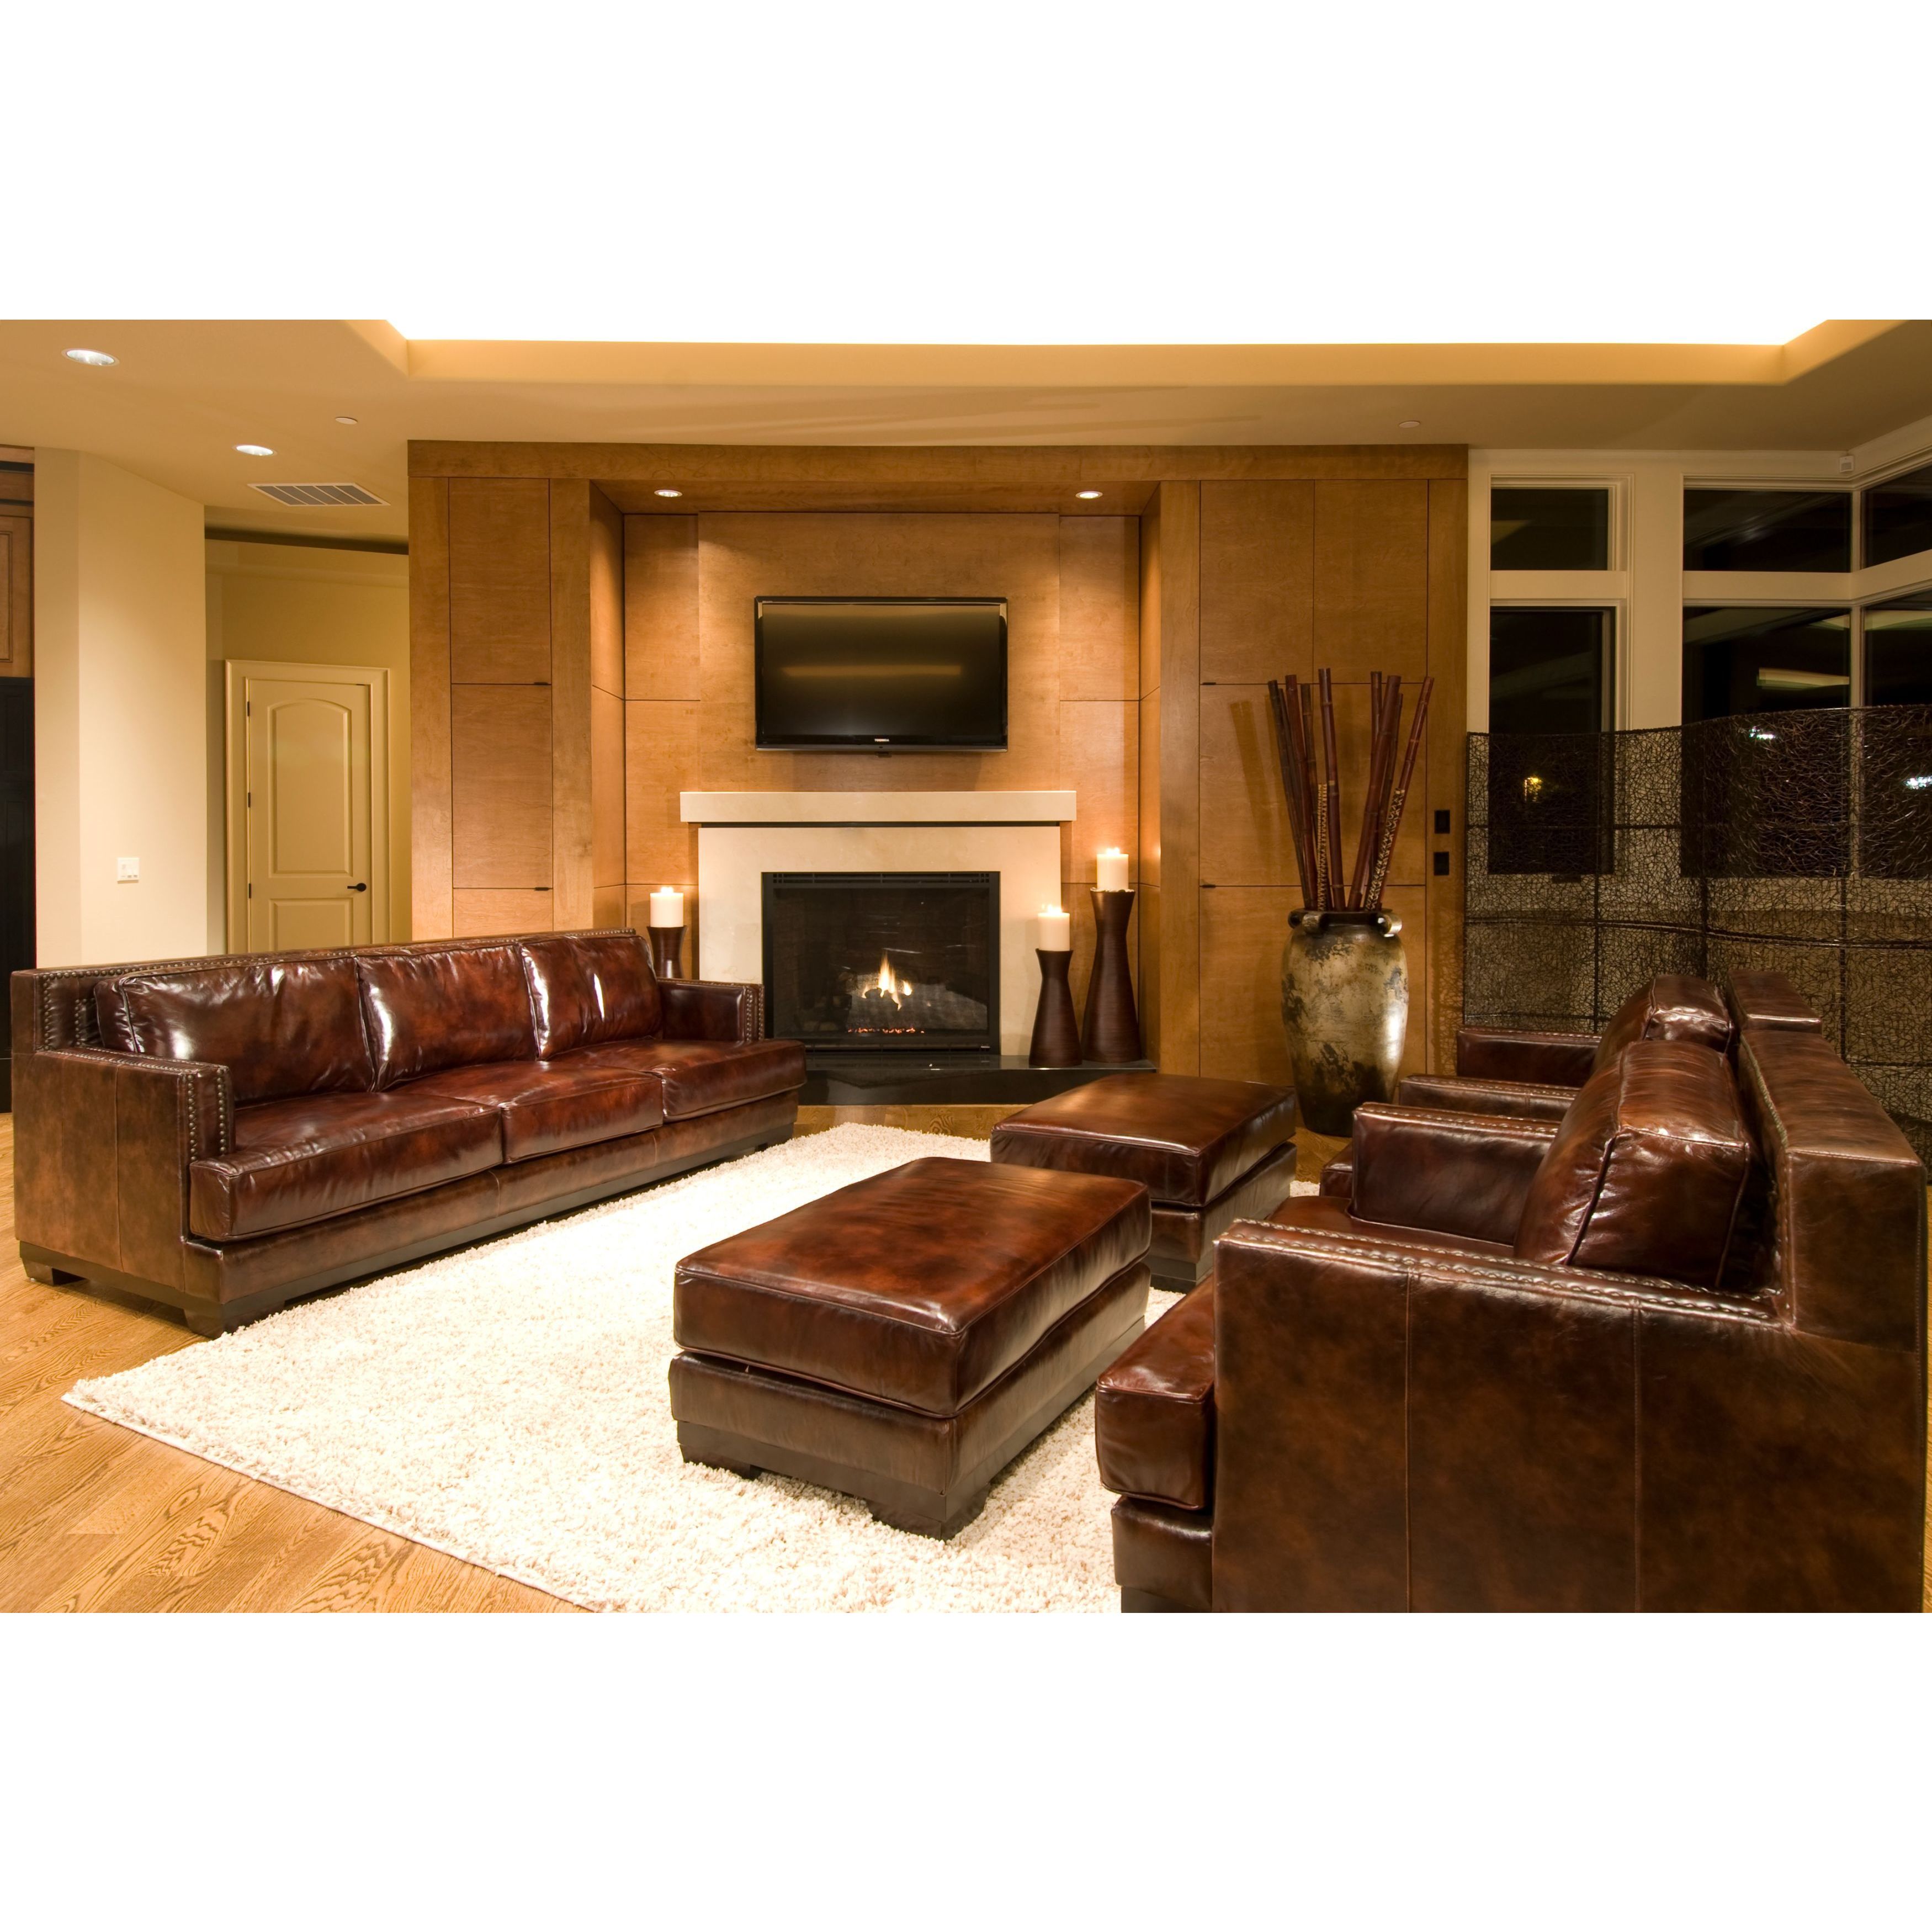 Emerson Collection Saddle Top Grain Leather 5 Piece Living Room Furniture Set Overstock 12852443